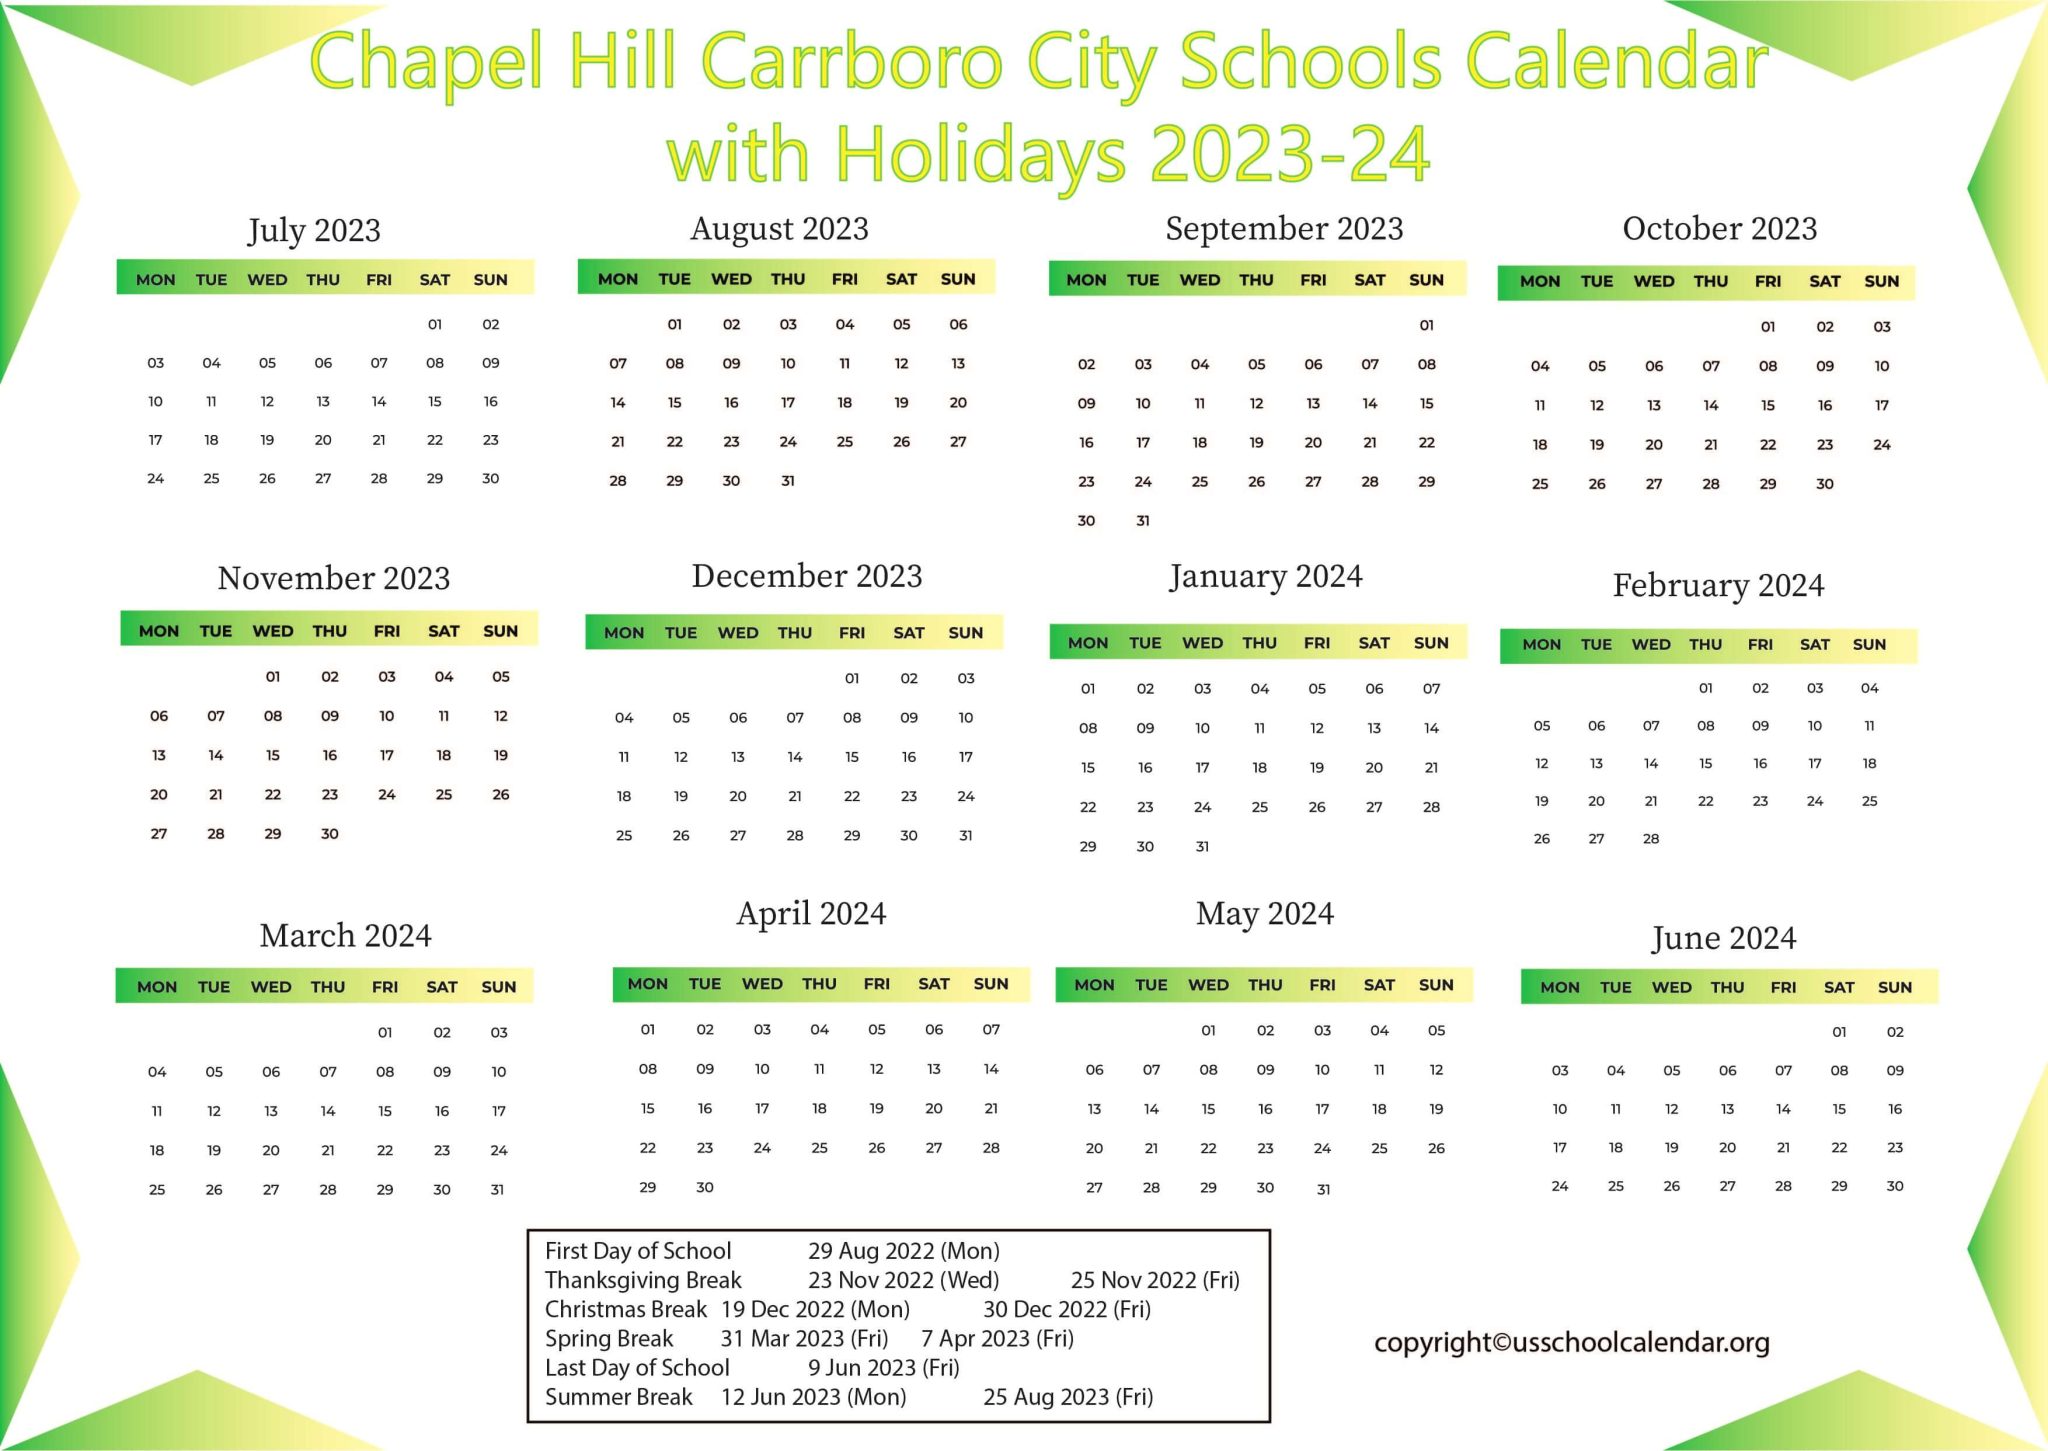 Chapel Hill Carrboro City Schools Calendar with Holidays 202324